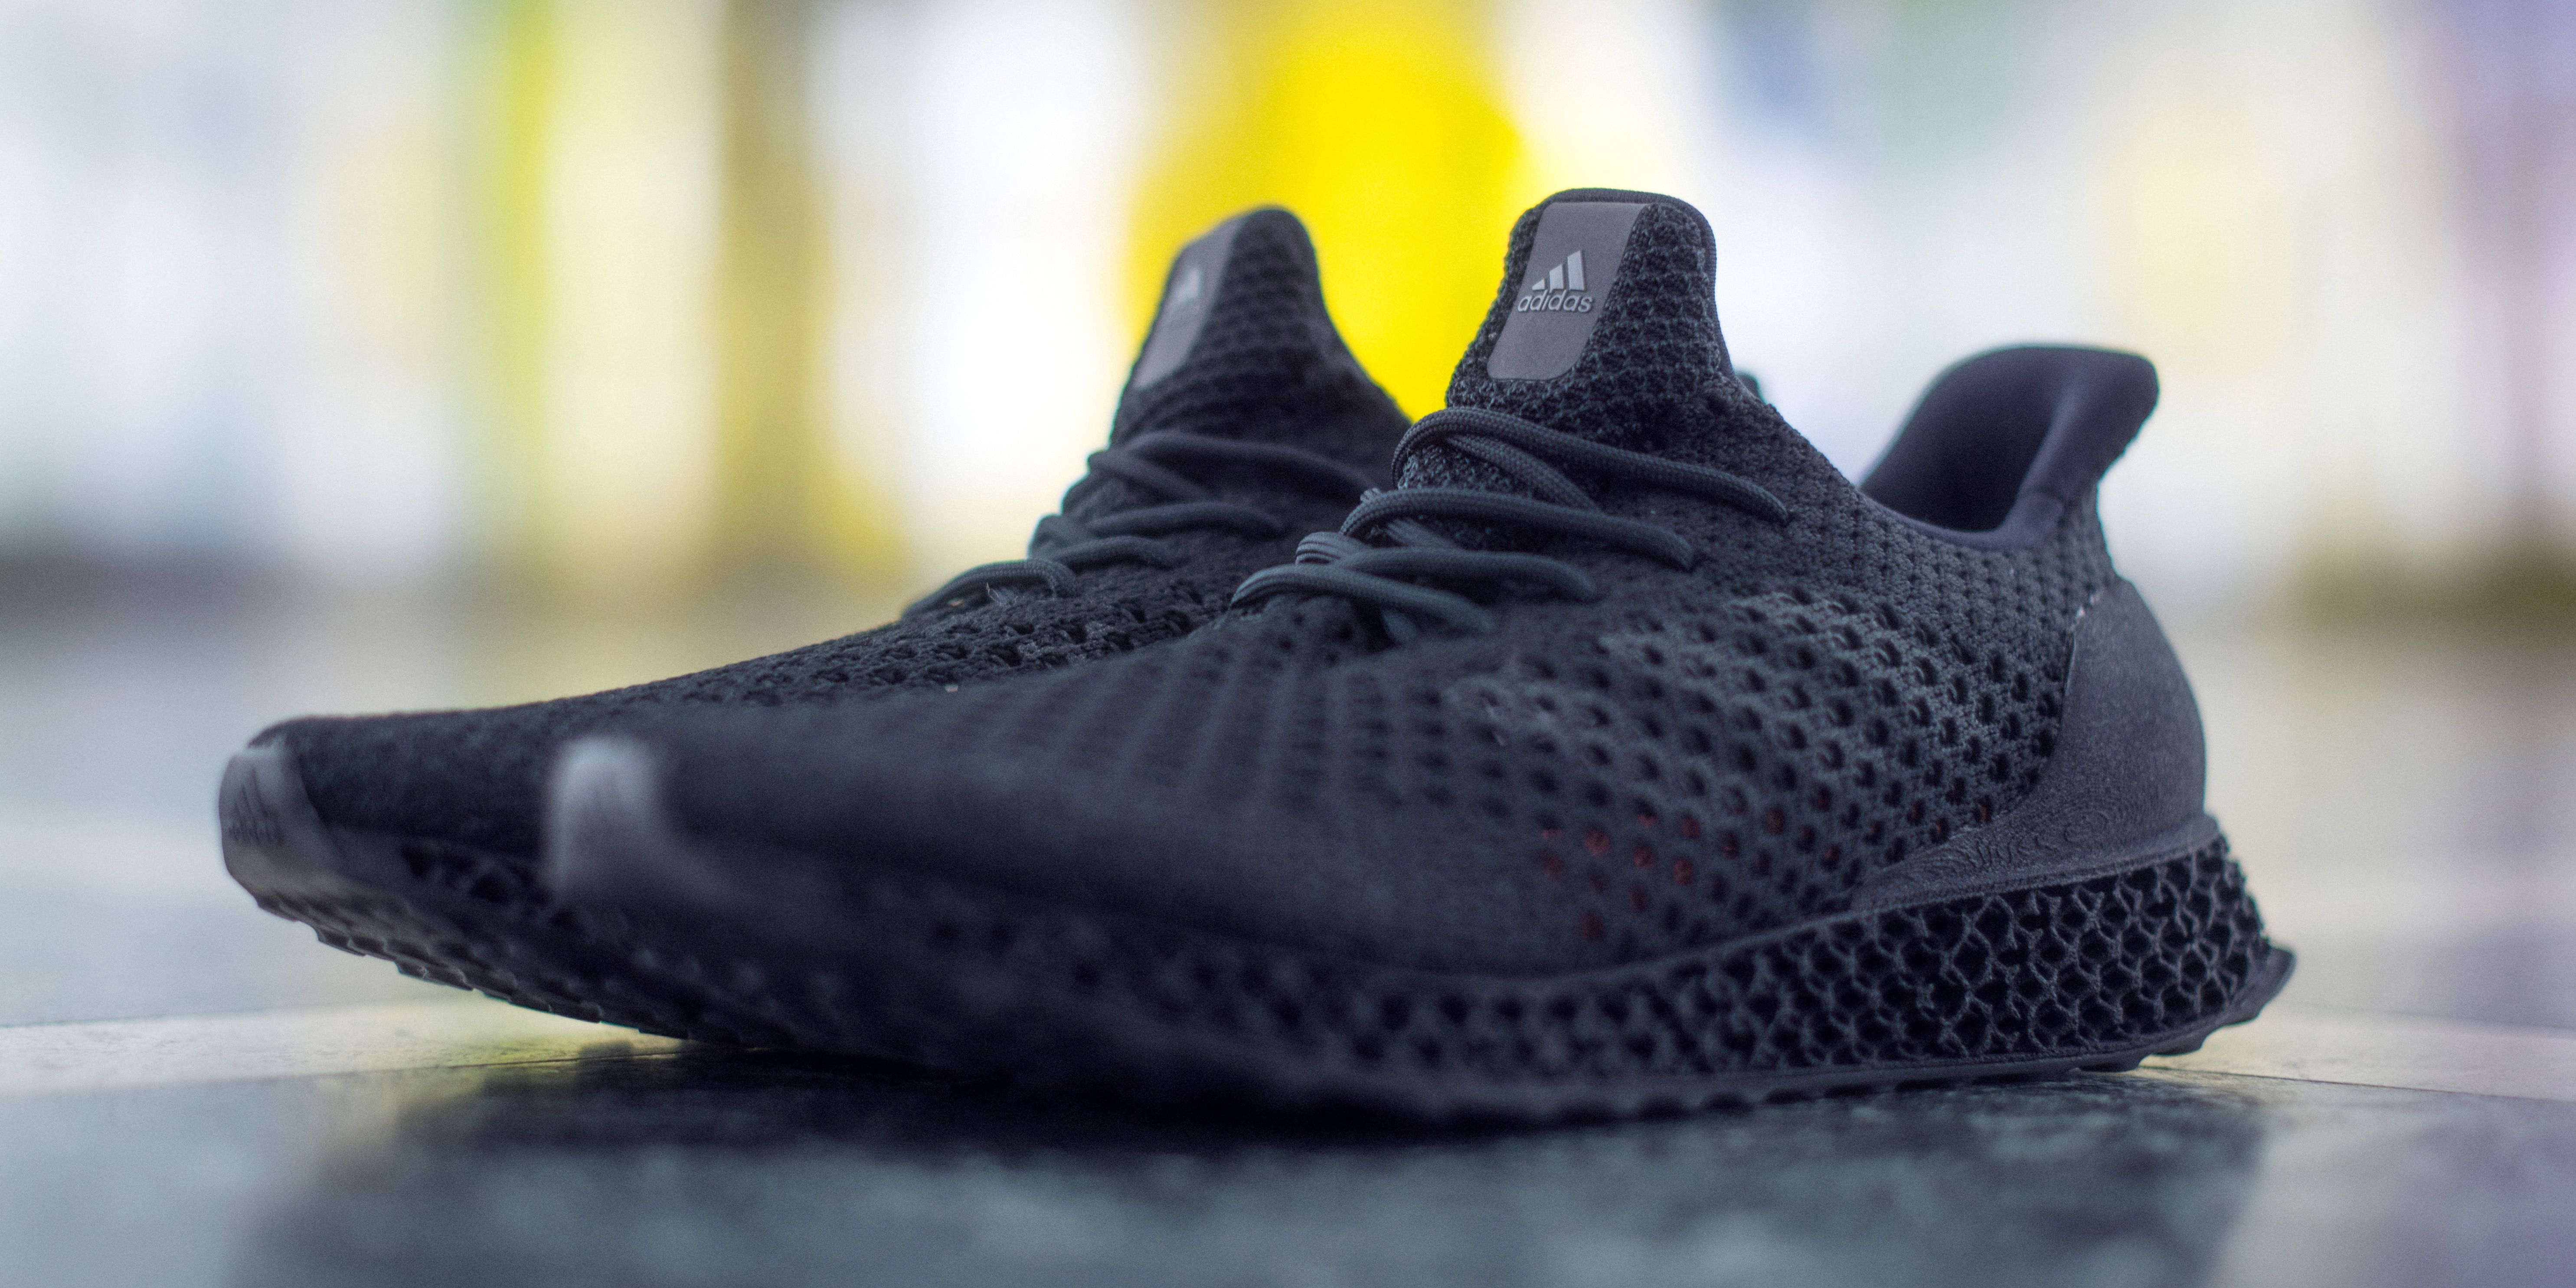 Inferior apilar Permiso Where to Buy Adidas' New 3D Runner - Adidas Is Releasing a 3D-Printed  Sneaker